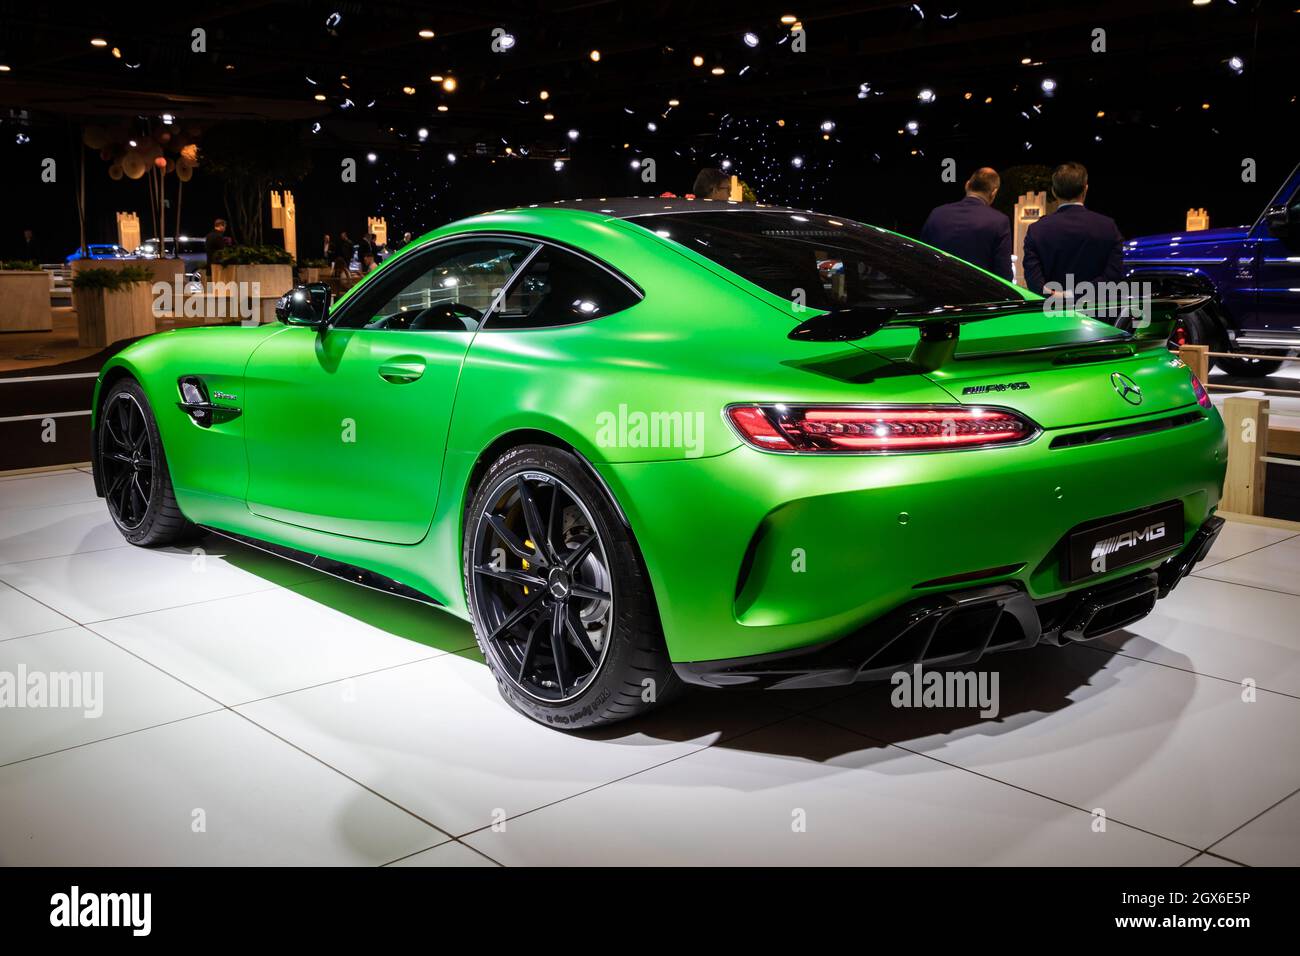 Mercedes-AMG GT R Coupe sports car at the Autosalon 2020 Motor Show. Brussels, Belgium - January 9, 2020 Stock Photo